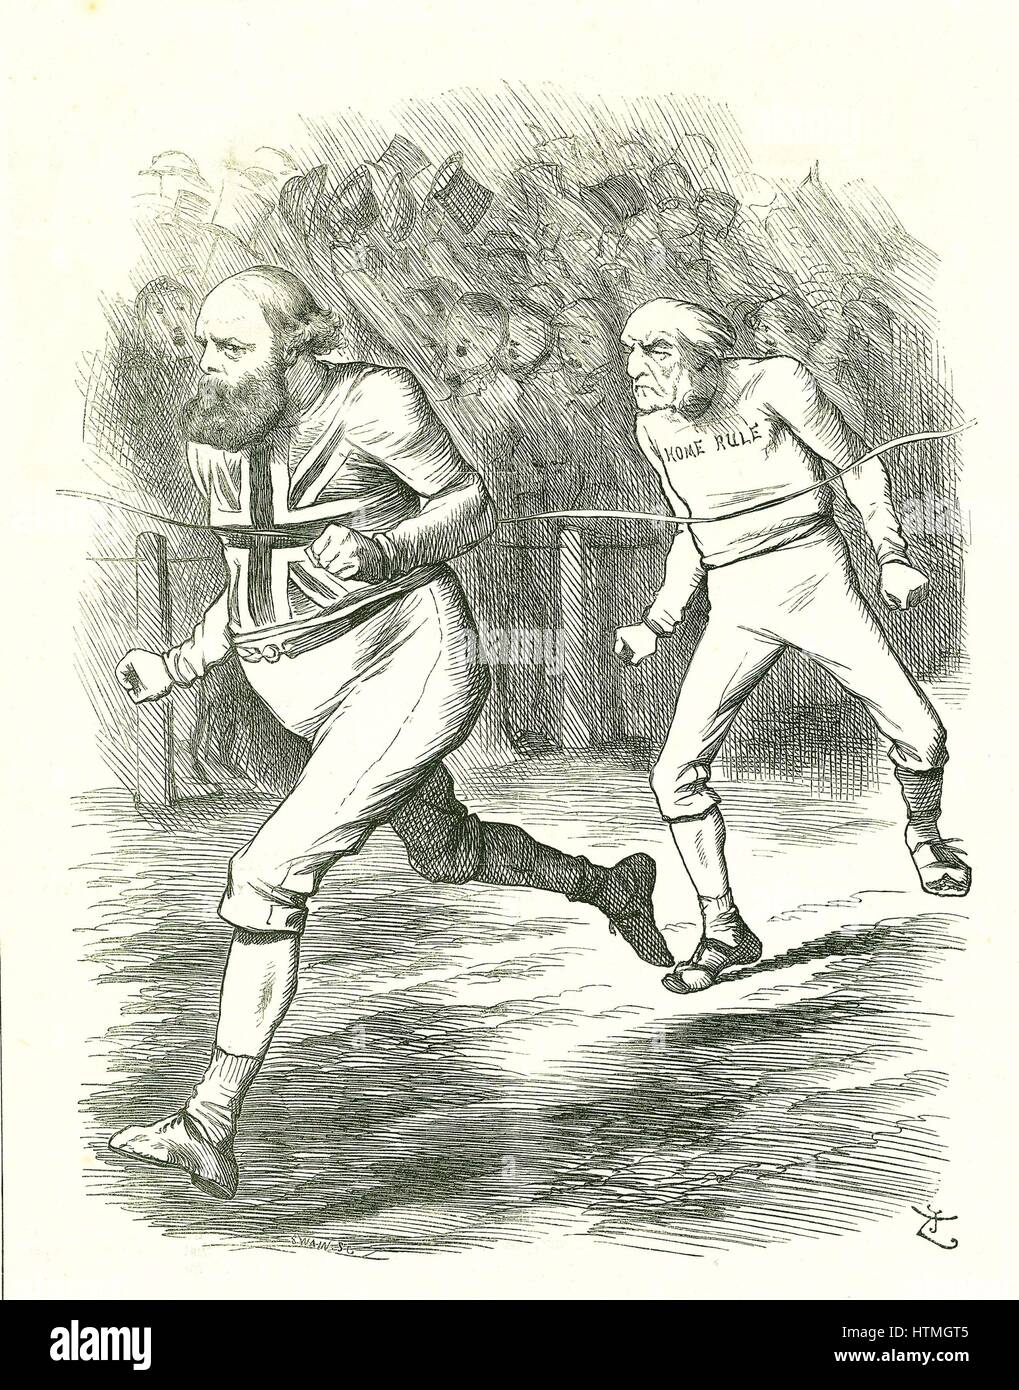 'The Finish': General Election 1886. Gladstone (Liberal) went to the country over his Home Rule for Ireland bill. Salisbury (Conservative opposition) beats Gladstone to the finishing line . John Tenniel cartoon from 'Punch', London, 17 July 1886. Stock Photo